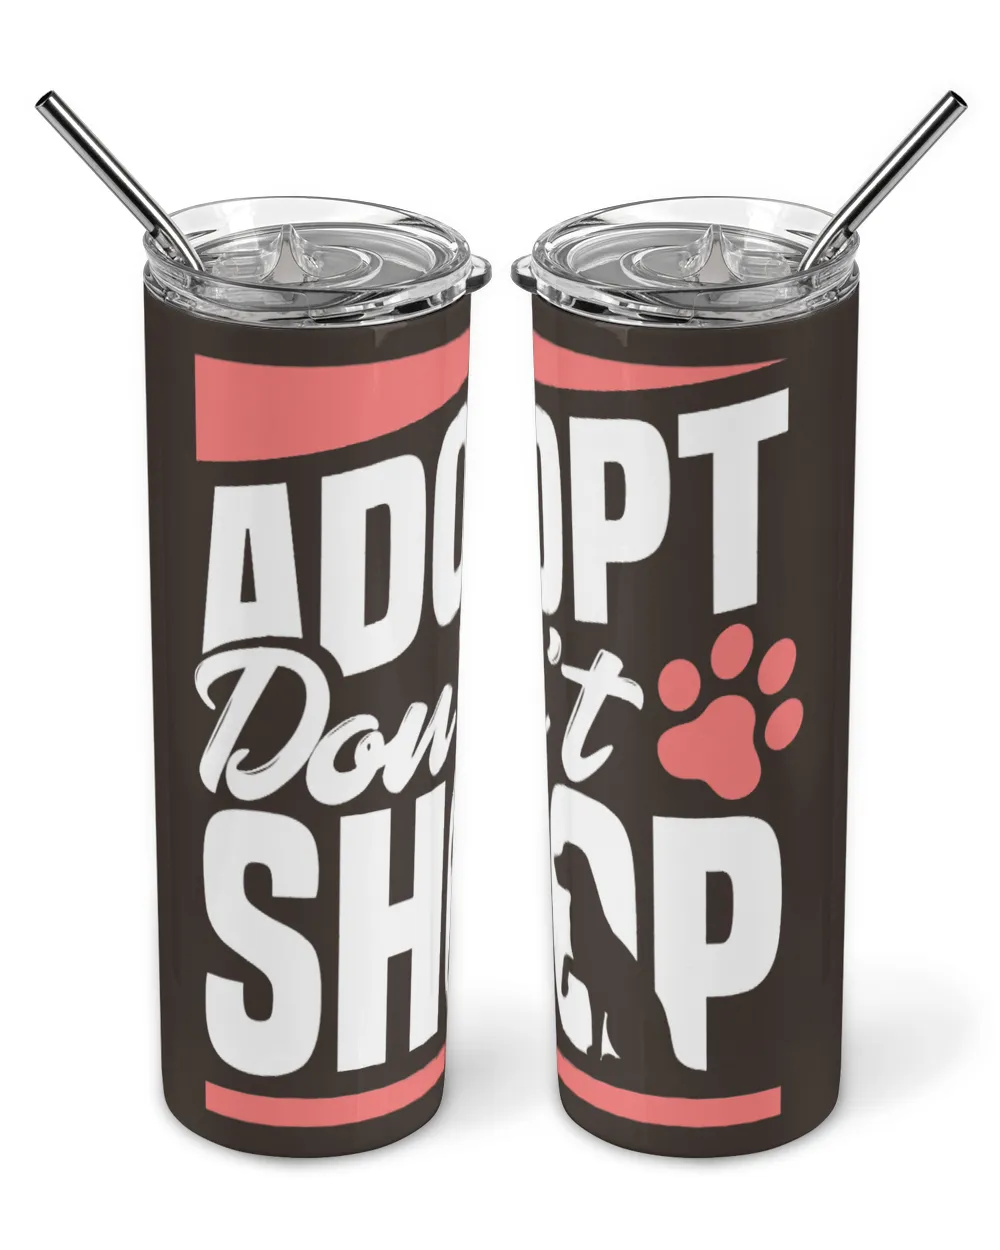 Adopt Dont Shop Dogs Cats Rescued Animal Lovers